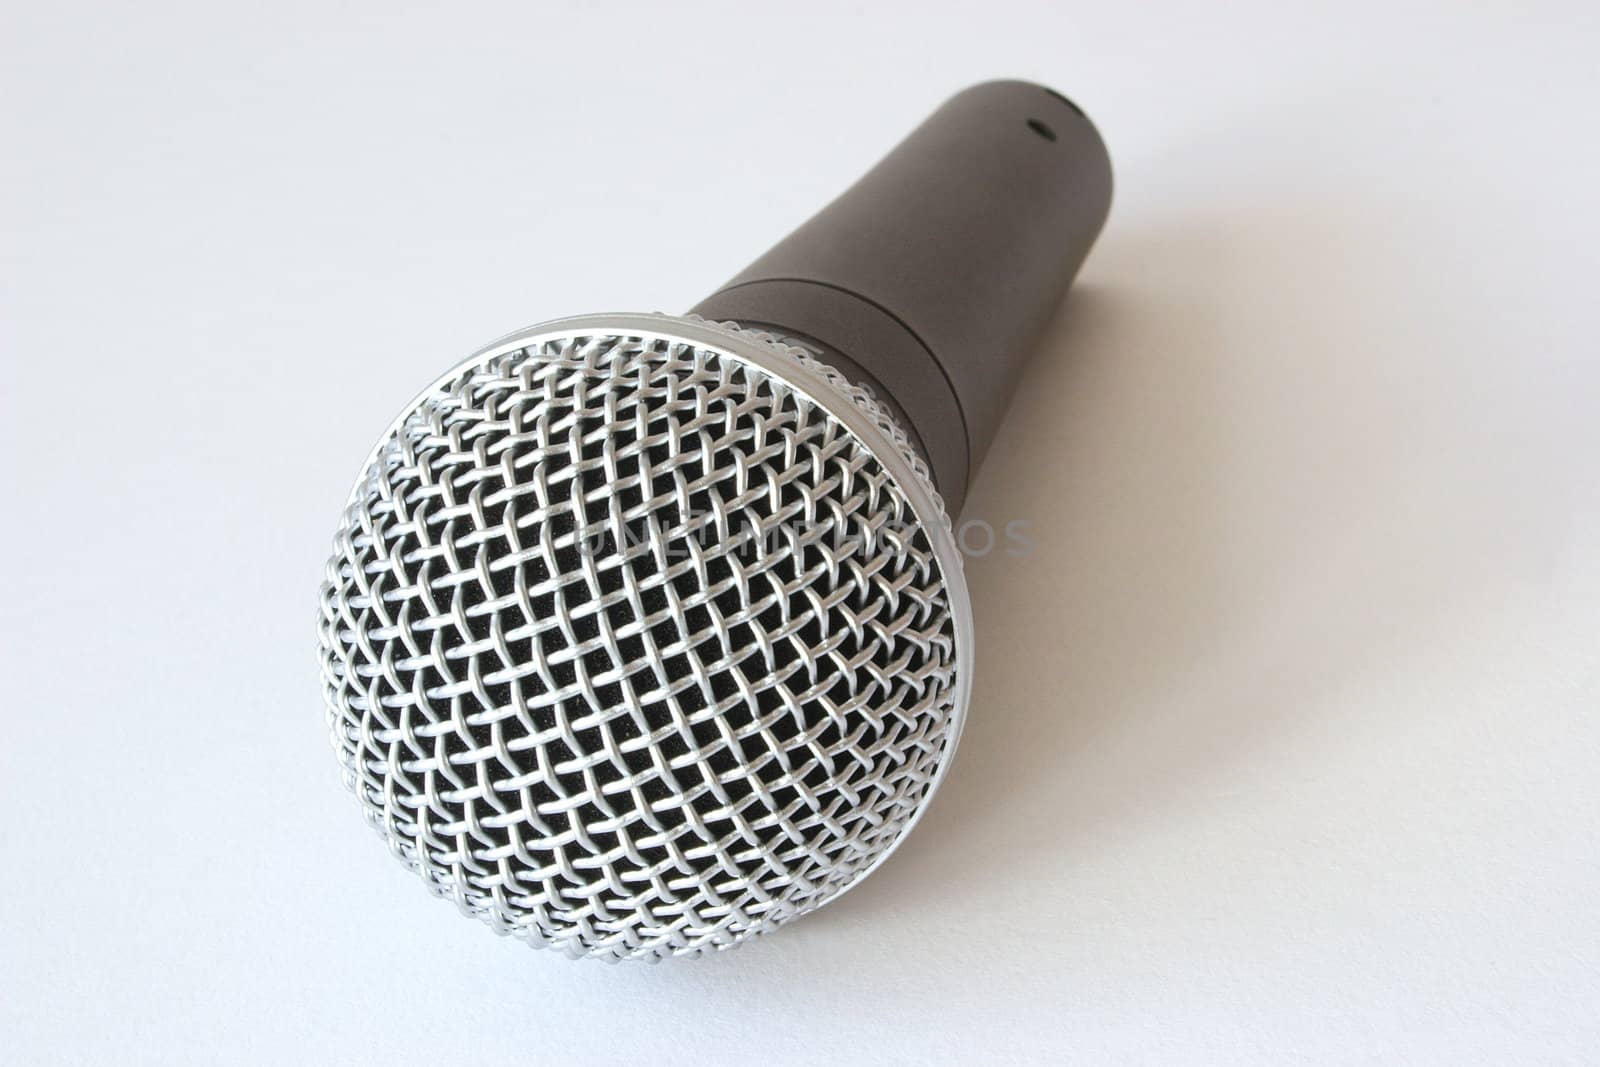 musicians microphone against a light background